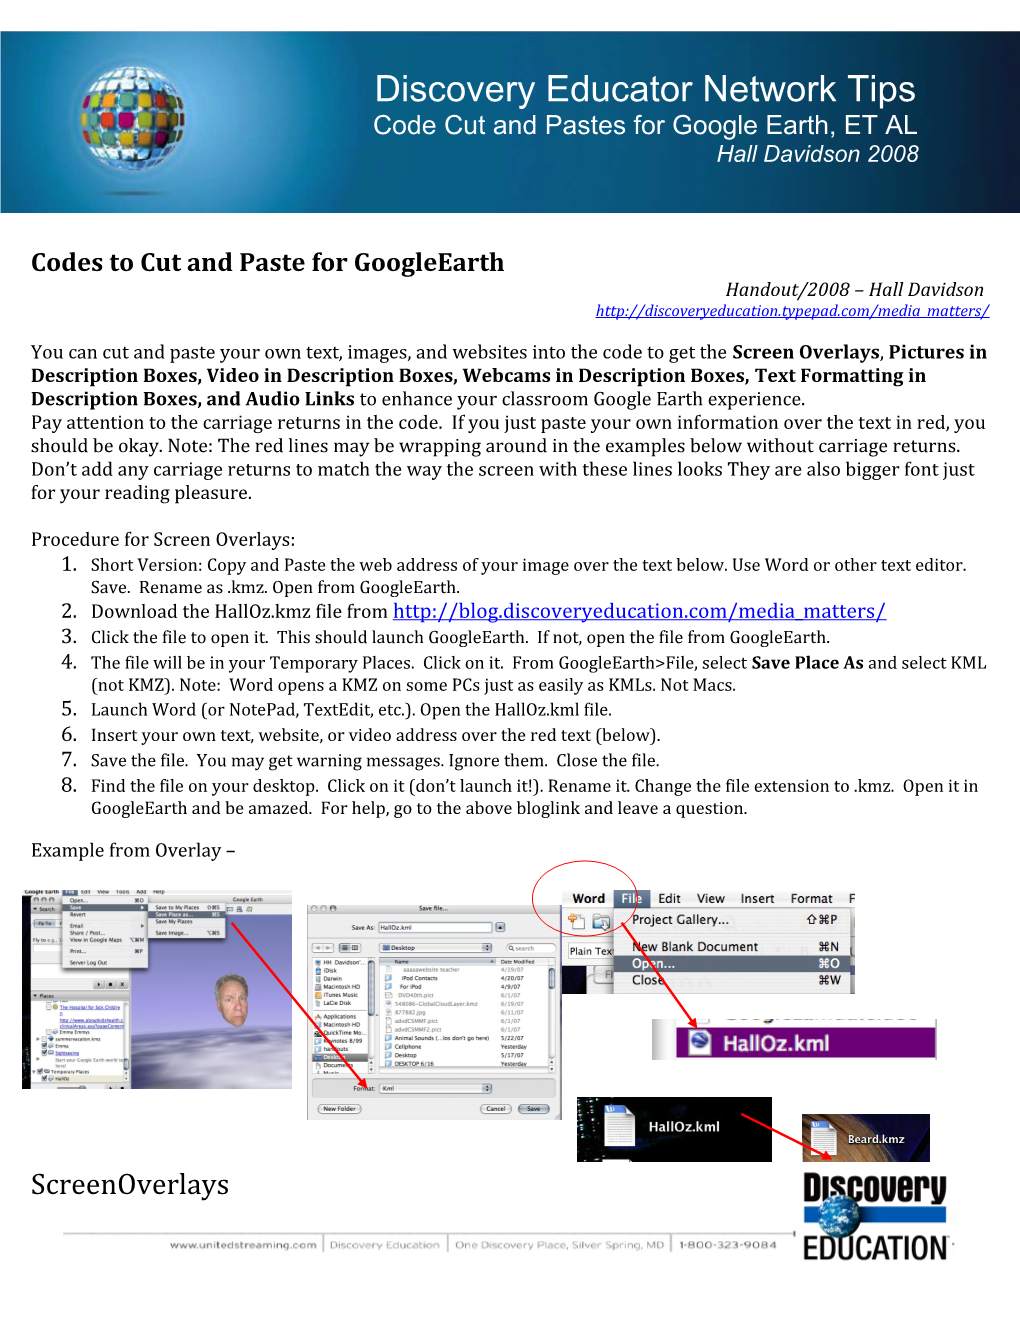 Codes to Cut and Paste for Googleearth